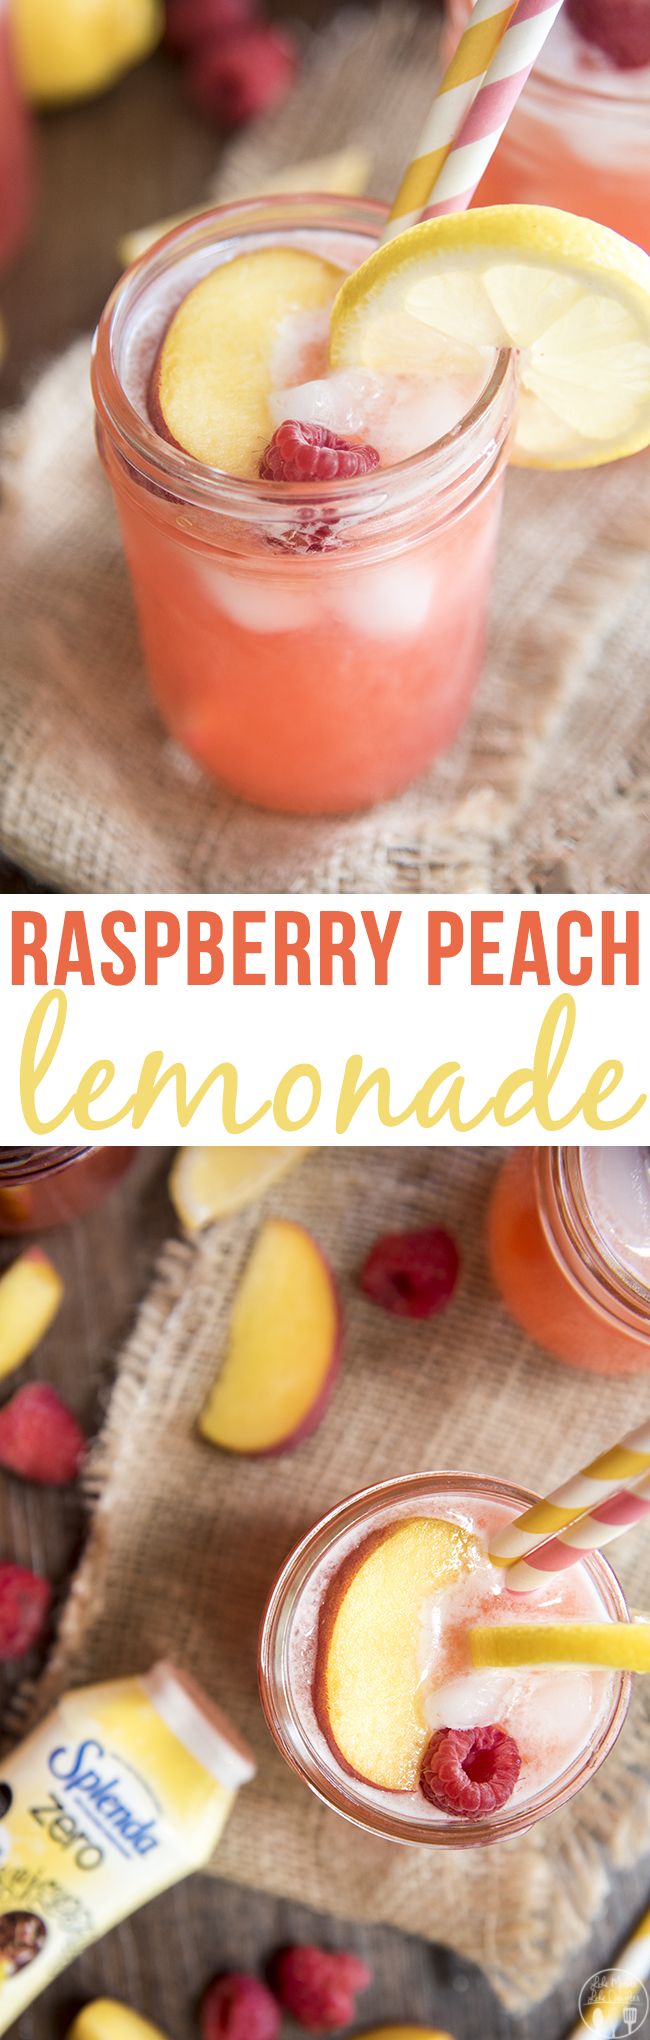 Raspberry Peach Lemonade - This lemonade is full of fresh raspberries and peaches perfect for sipping all summer long!